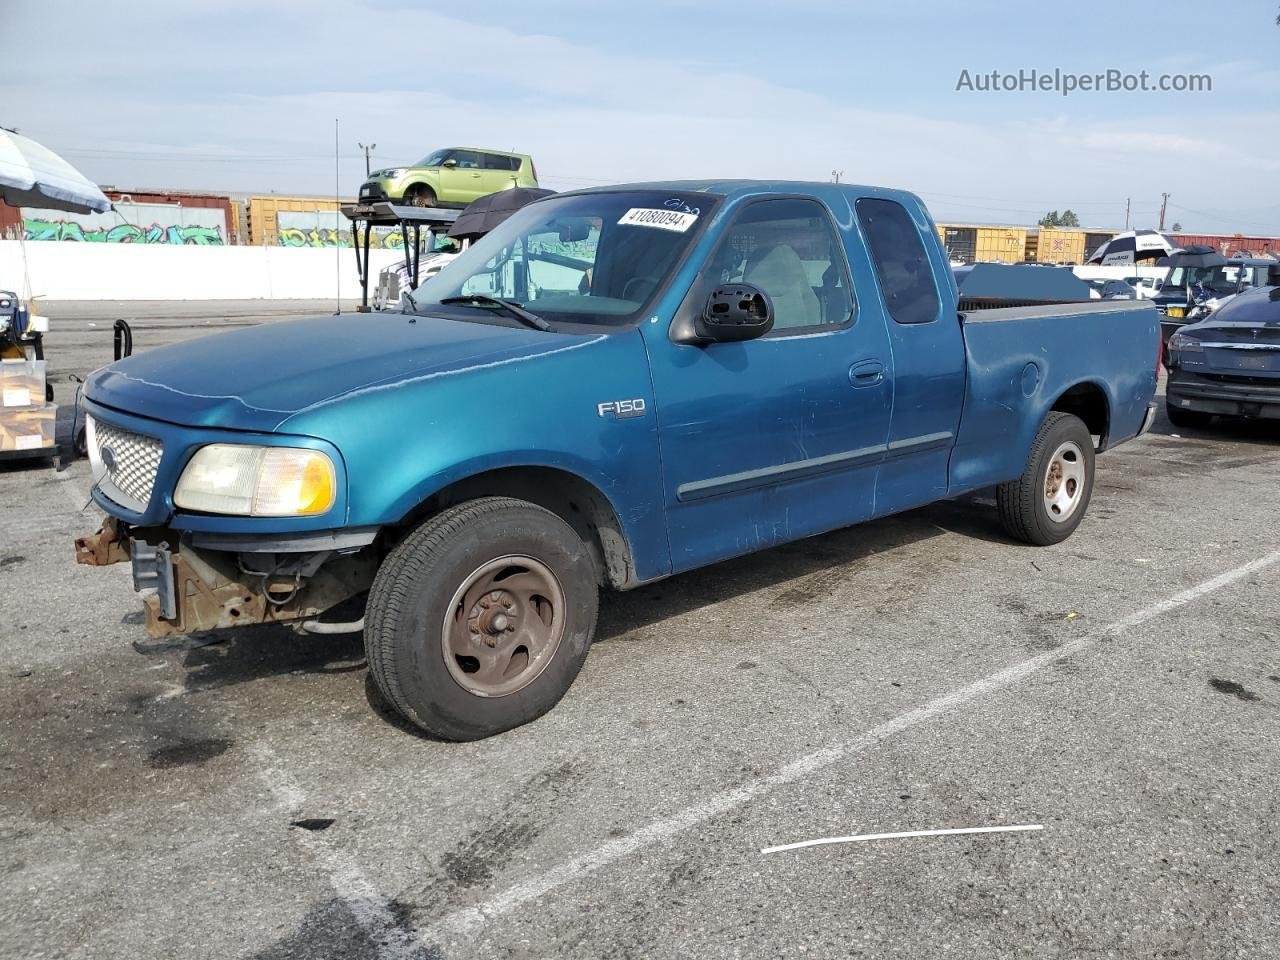 2001 Ford F150  Green vin: 1FTZX17251KF49442